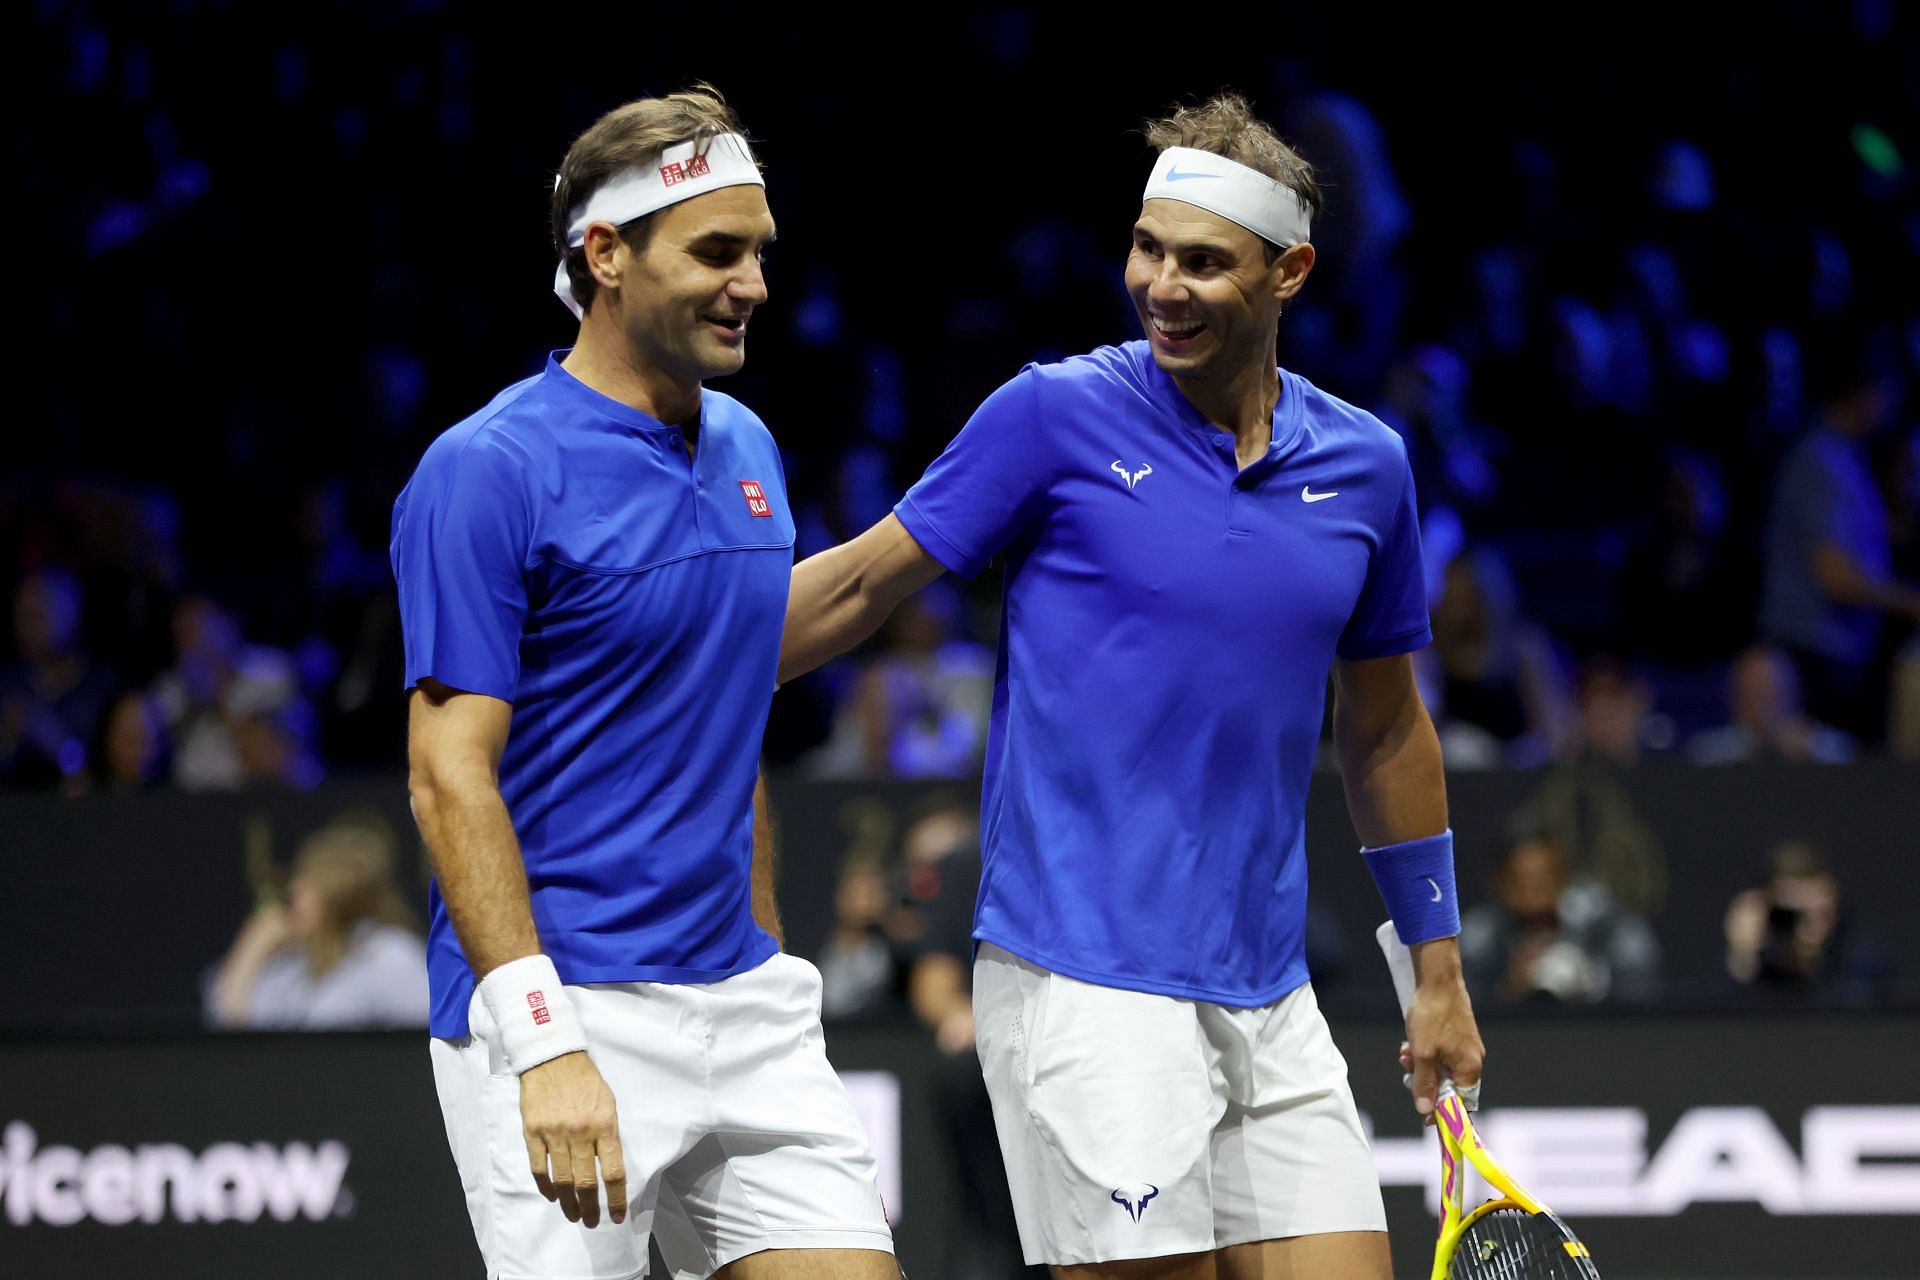 Rafael Nadal (right) at the Laver Cup this year.